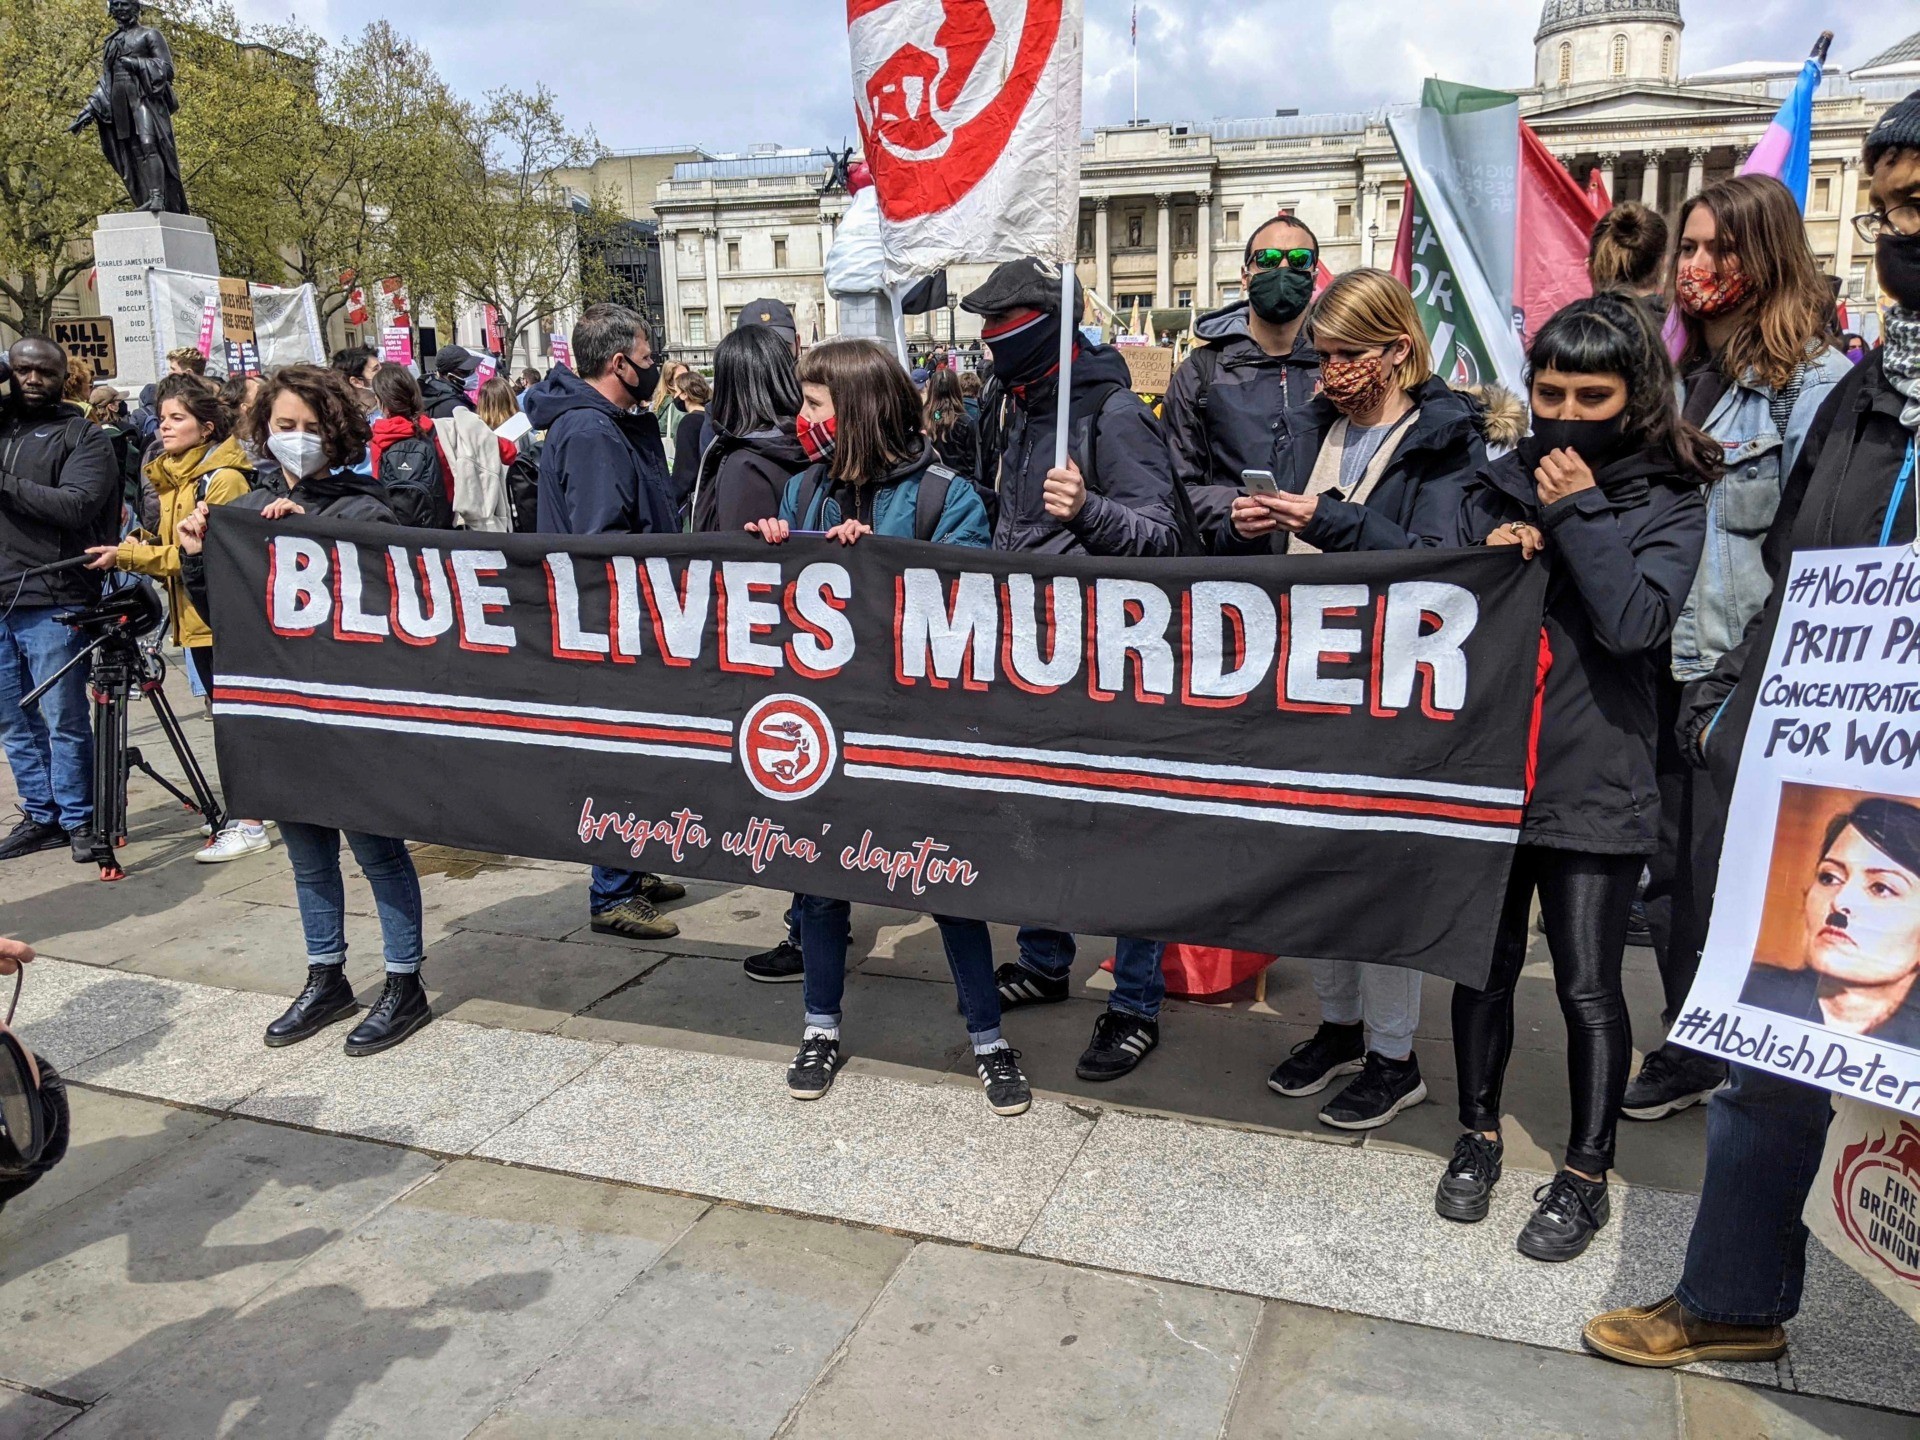 Thousands of leftist activists marched through London to protest against the proposed policing bill as well as the “racist” system in Britain on May Day, May 1st, 2021. Kurt Zindulka, Breitbart News